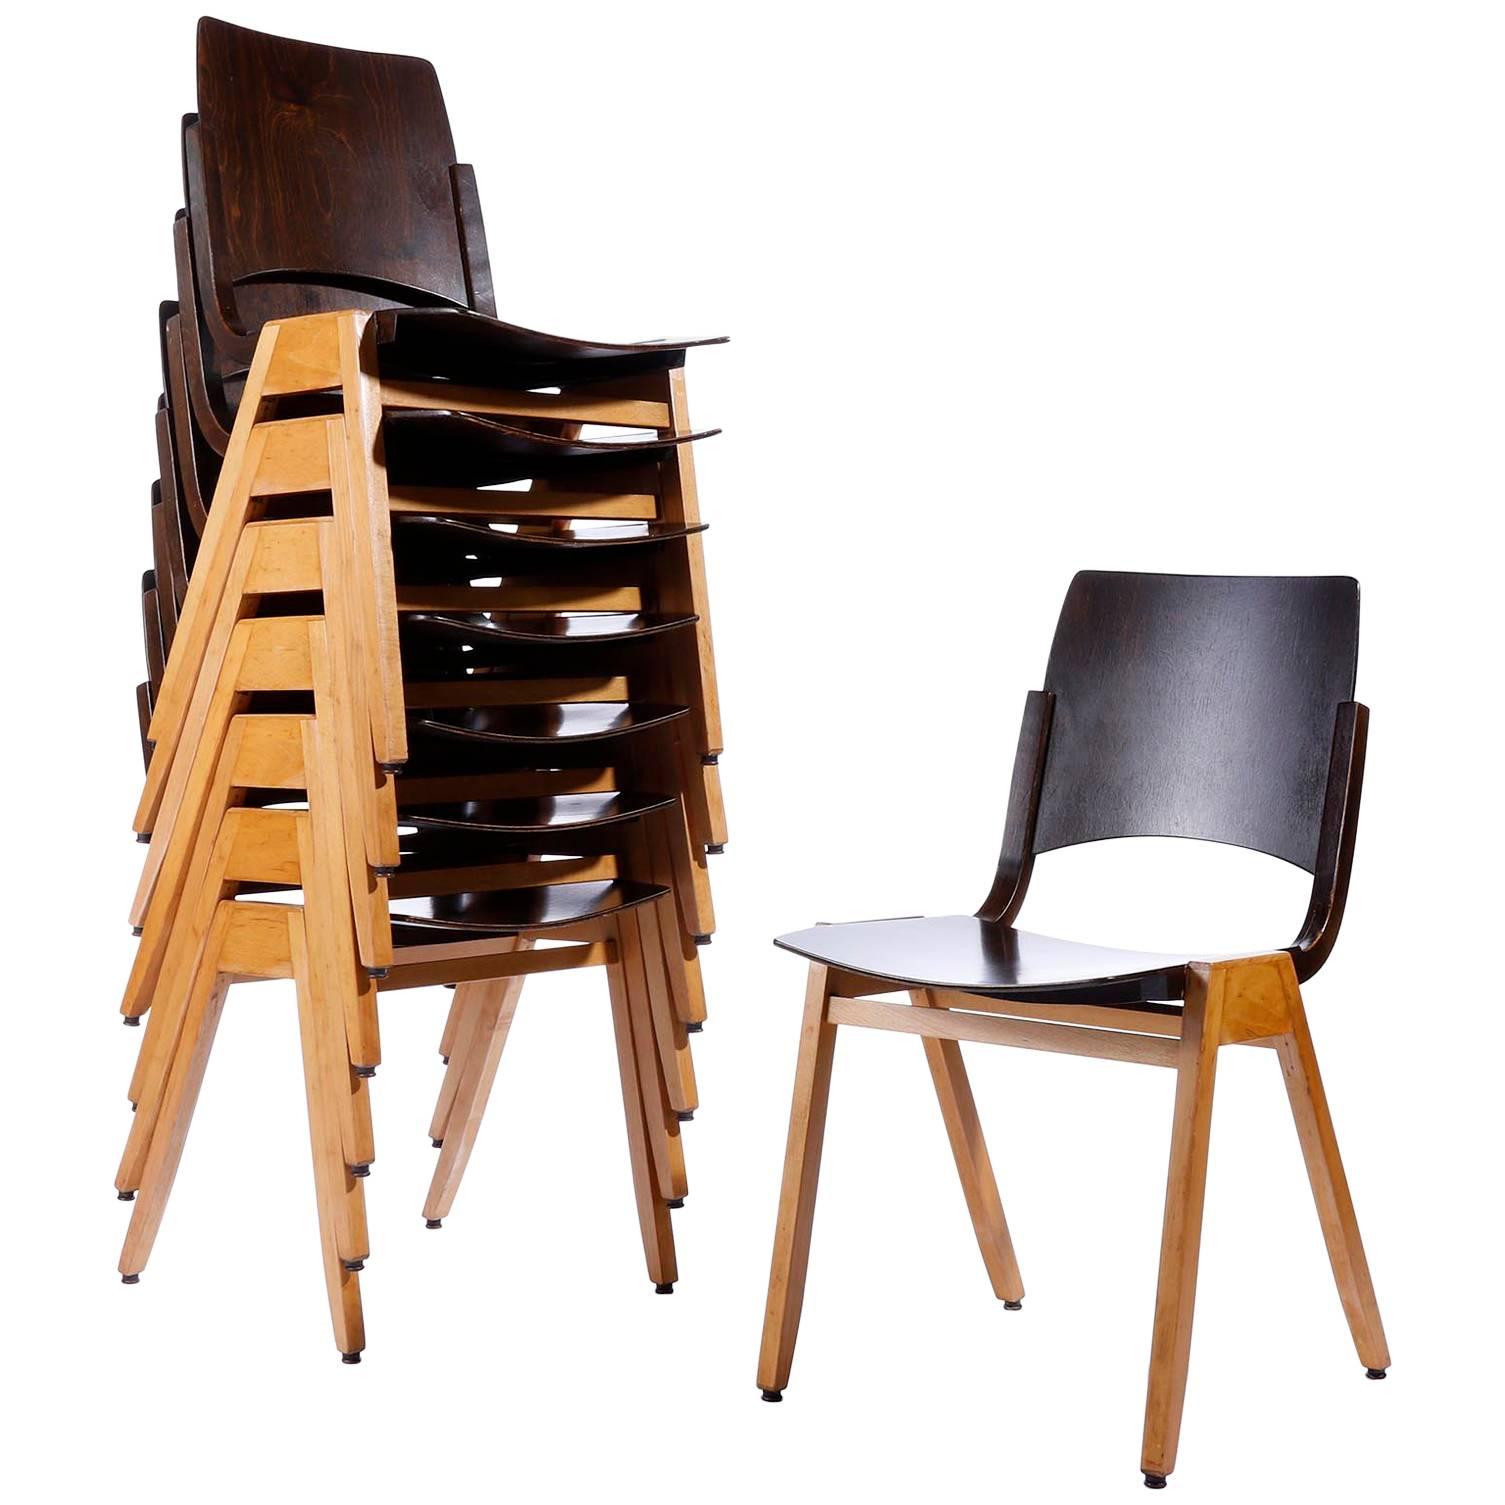 A set of eight stacking chairs designed by Professor Roland Rainer (1910-2004) in 1952 and manufactured by Emil & Alfred Pollak, Vienna.
Roland Rainer used these chairs for the Viennese city hall 